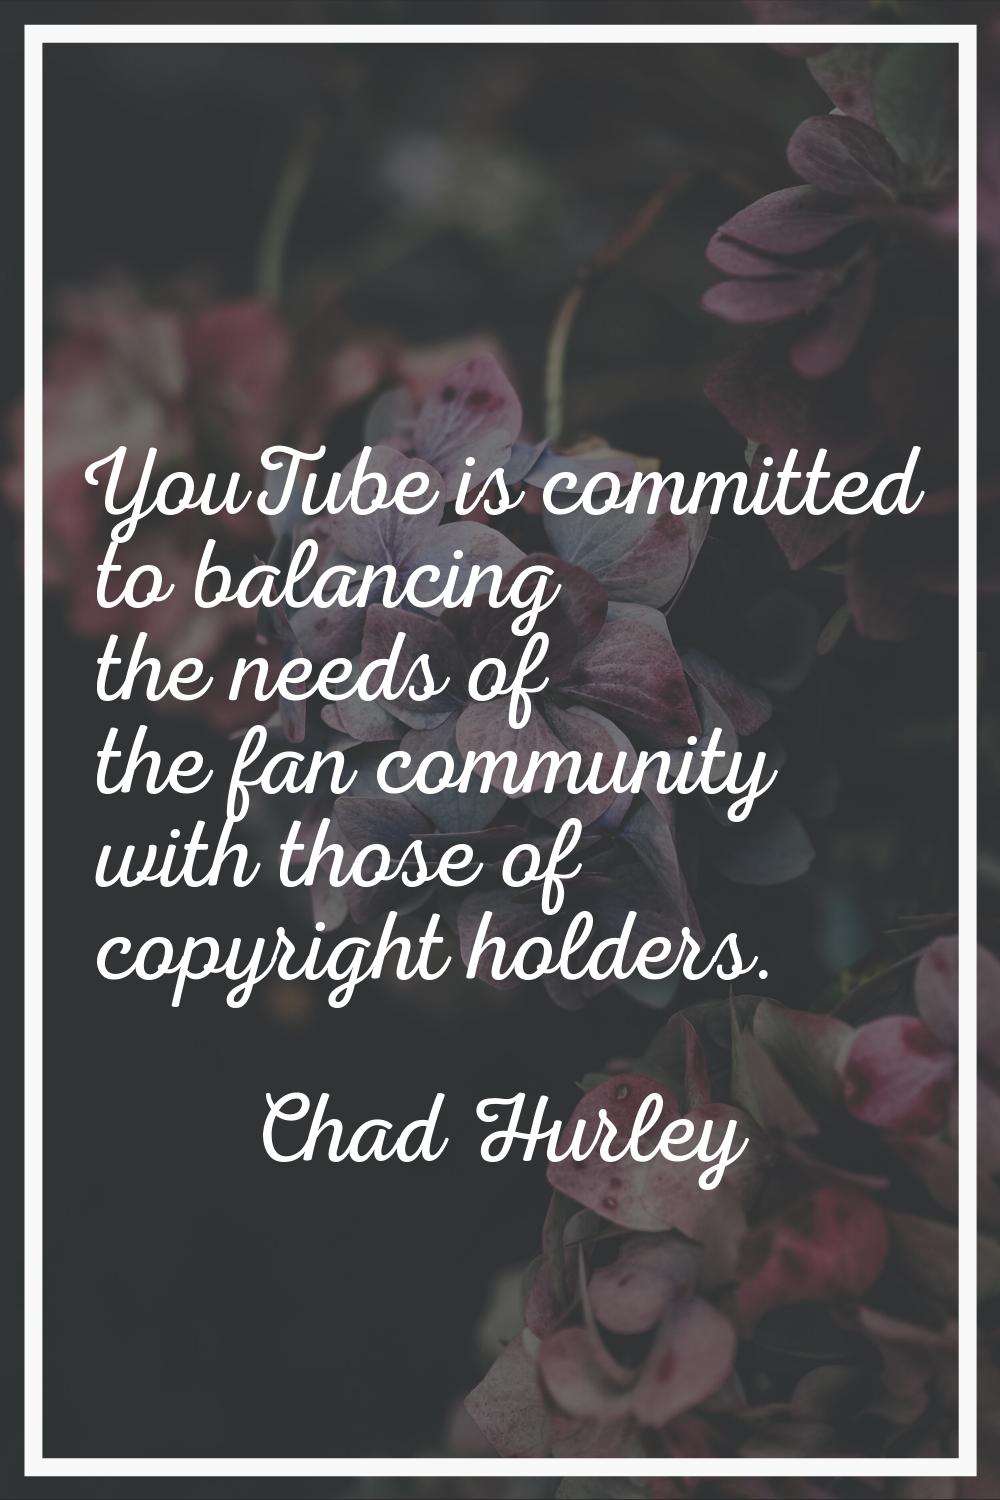 YouTube is committed to balancing the needs of the fan community with those of copyright holders.